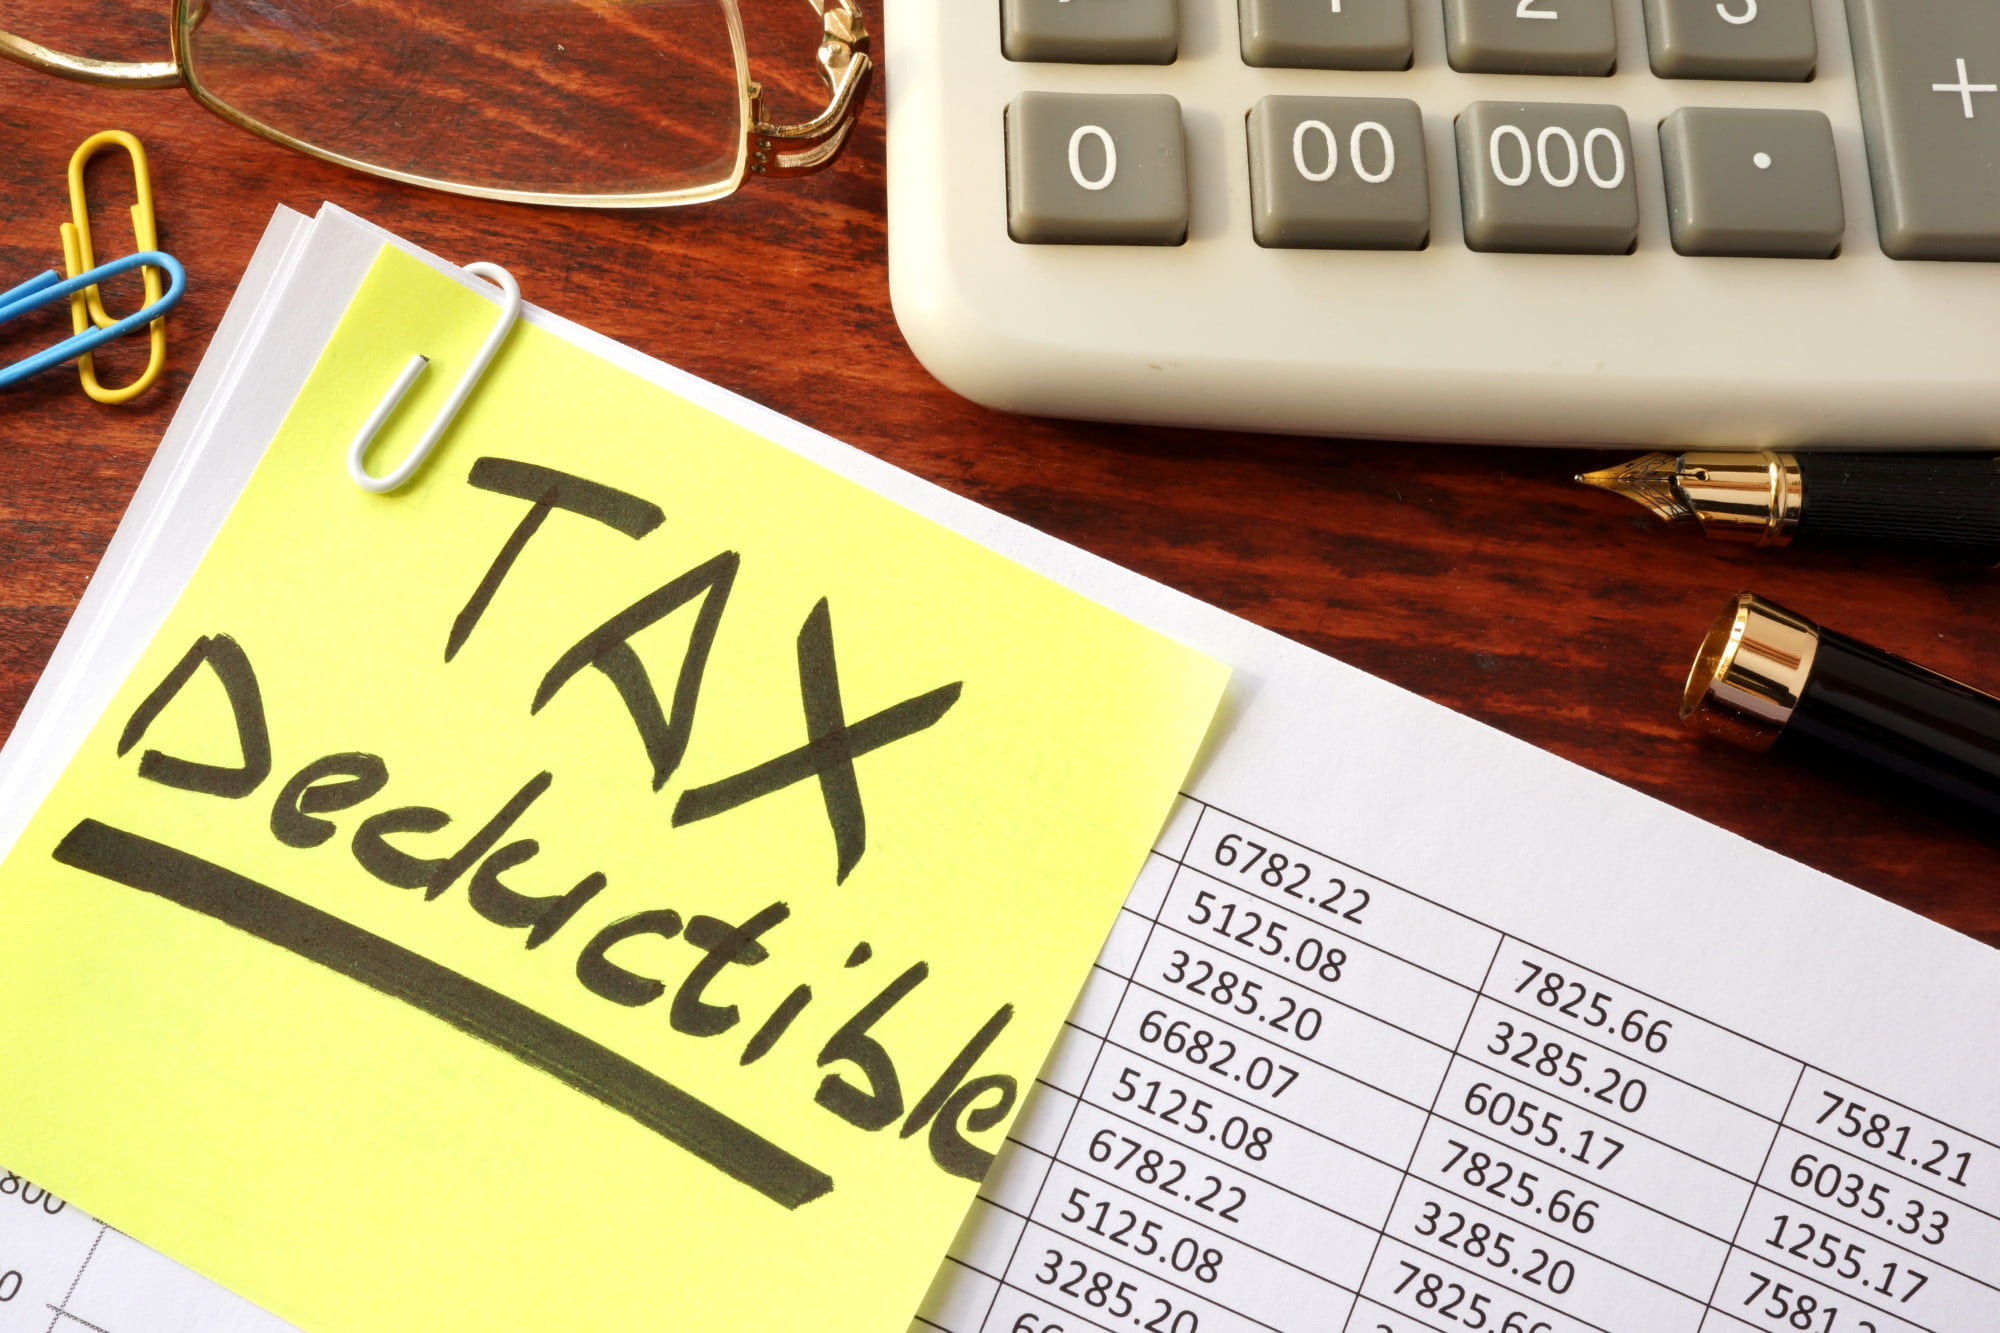 If you're trying to learn how to pay less in taxes, you came to the right place. These tips will really make a big difference.